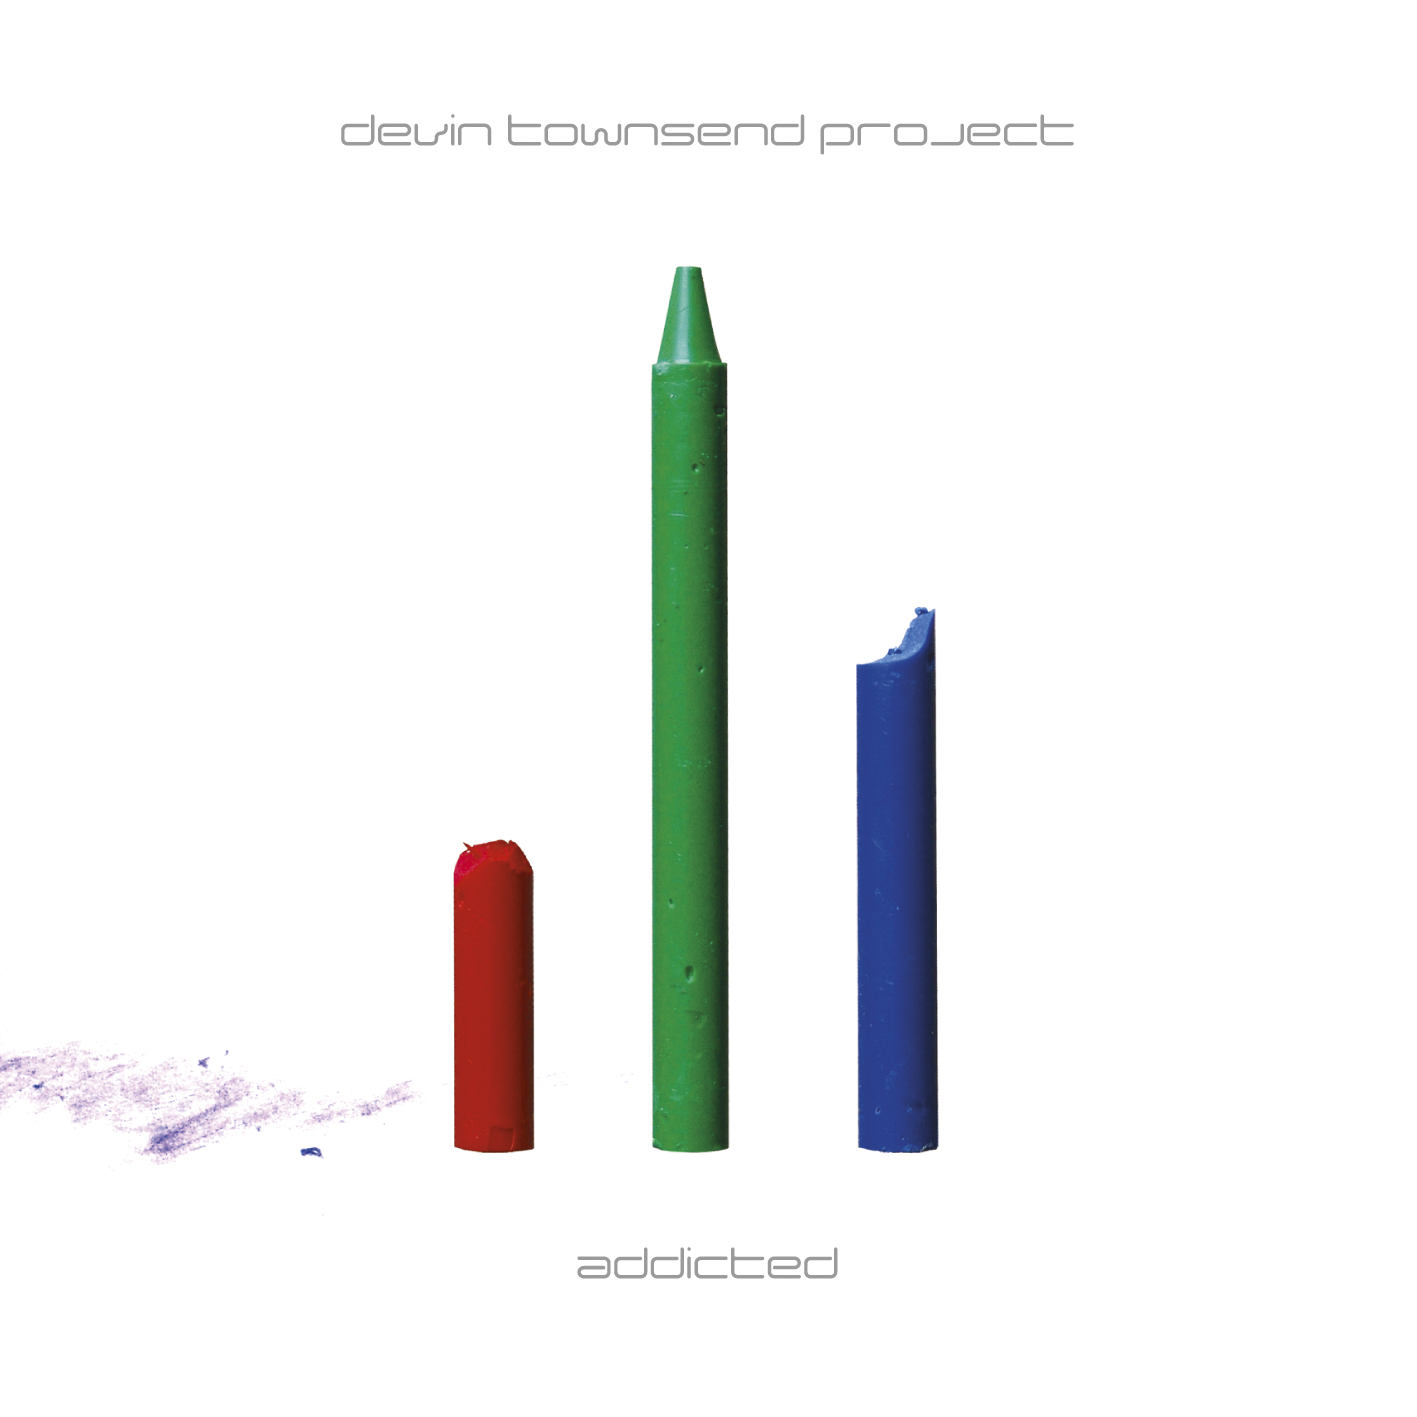 The Devin Townsend Project 'Addicted' album cover